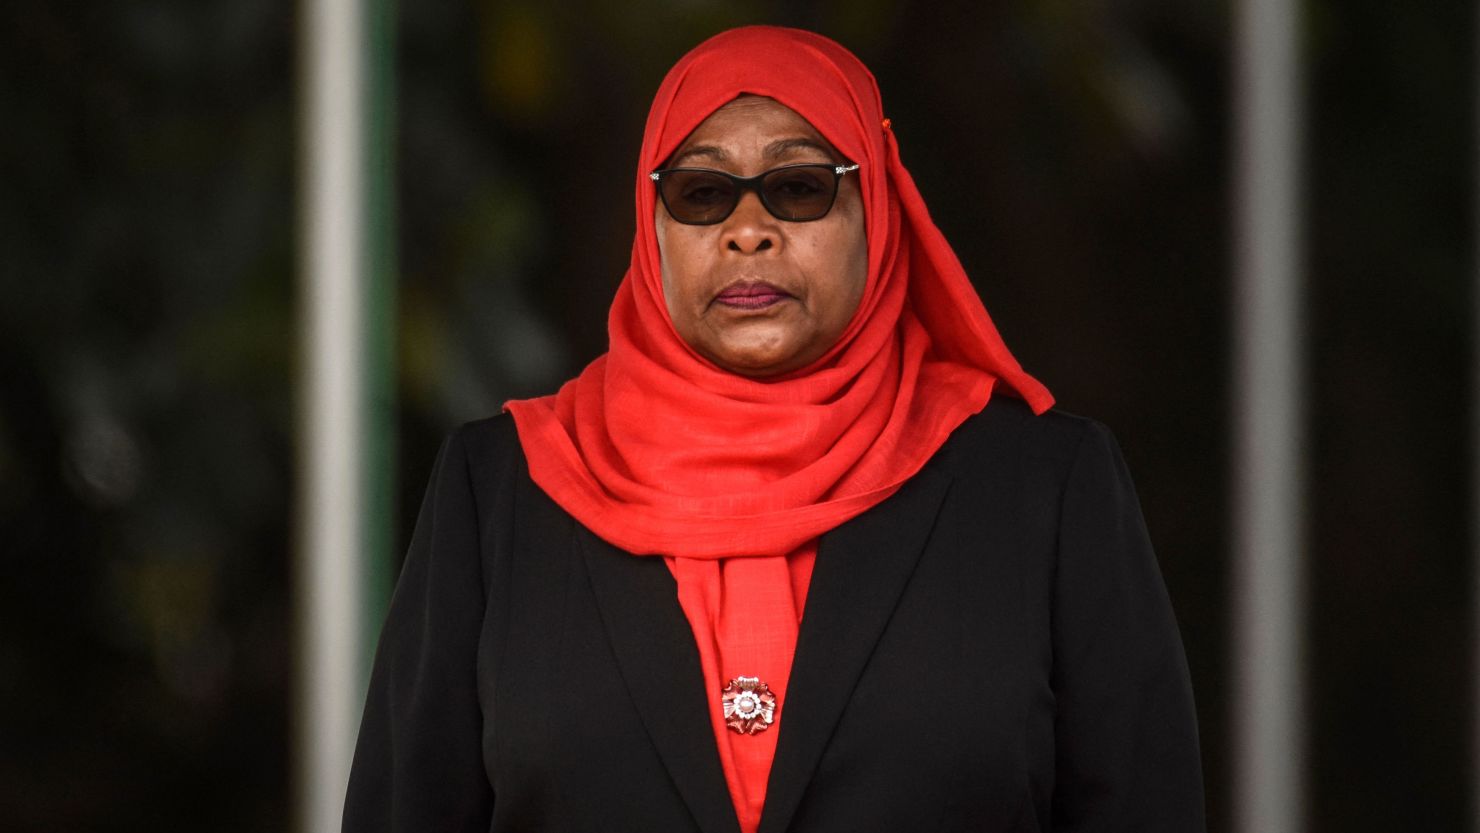 New Tanzanian President Samia Suluhu Hassan, pictured at a military parade following her swearing-in the as the country's first female President on March 19, 2021.